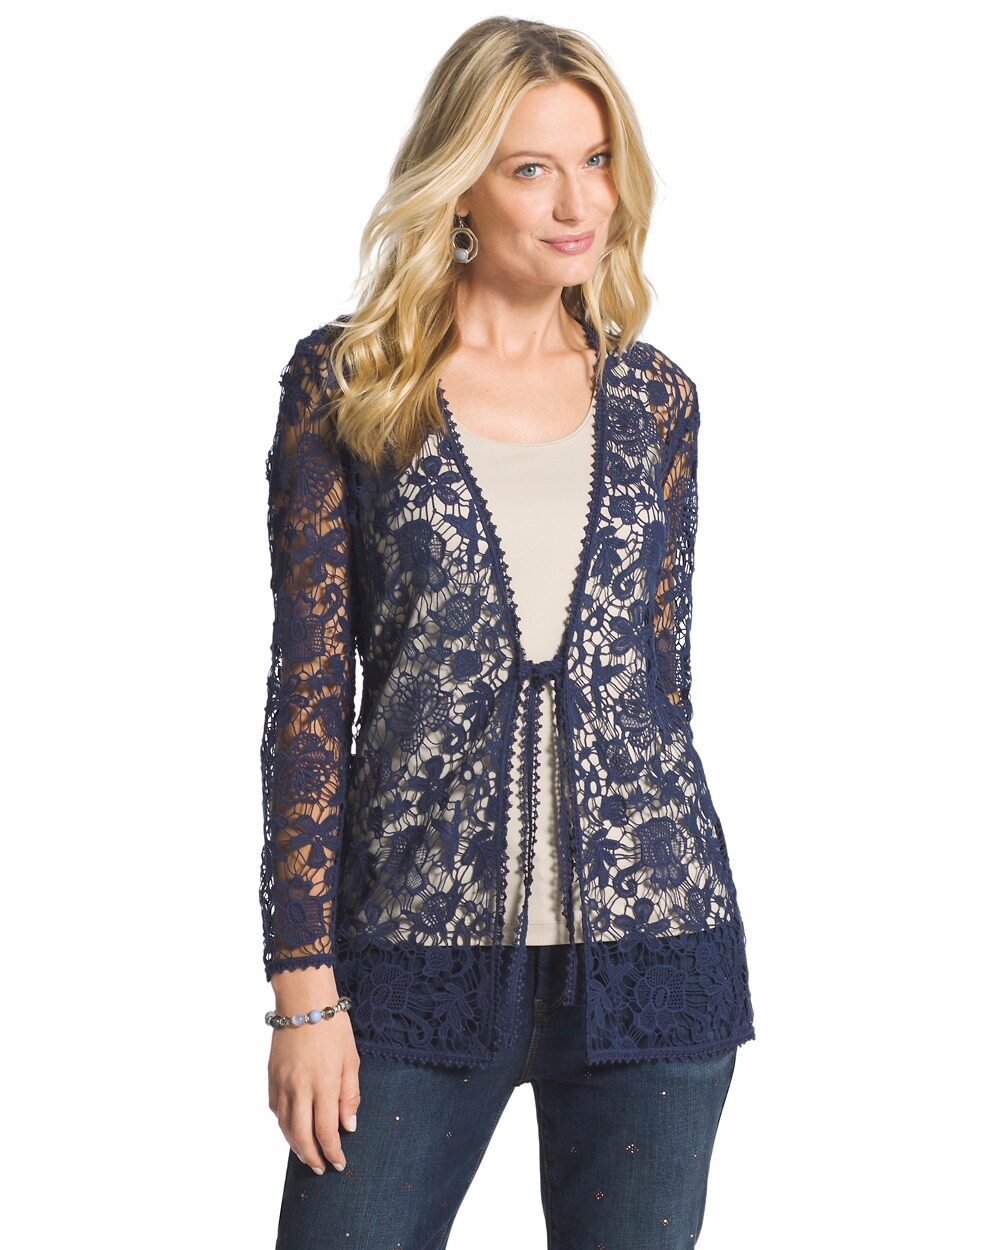 Crocheted Lace Jacket